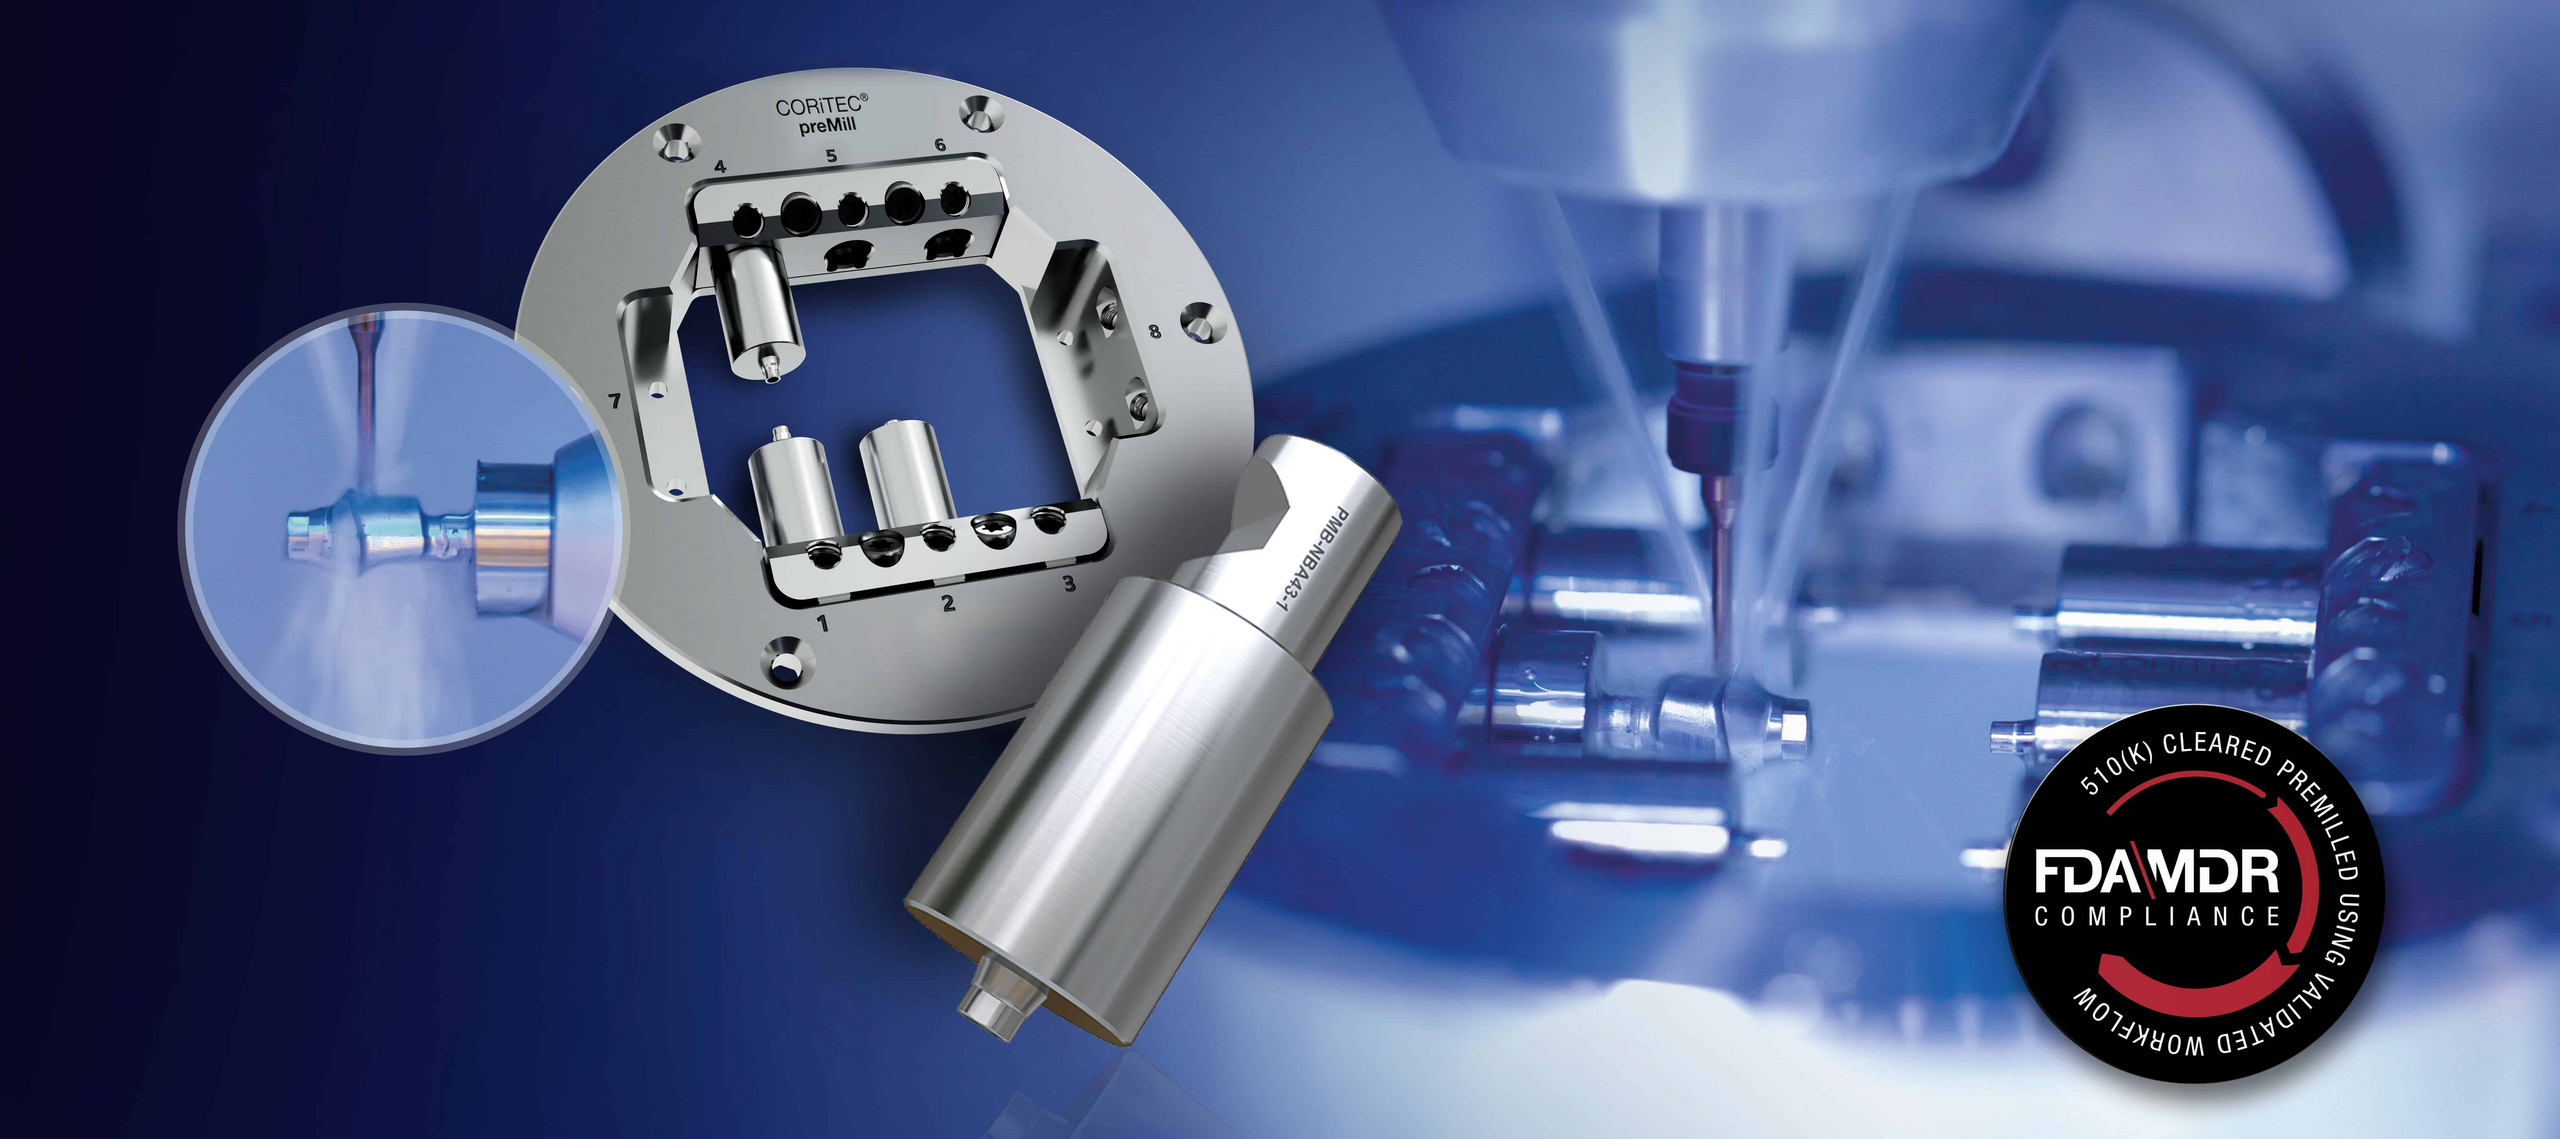 CORiTEC preMill system milling process with 6-fold preMill holder and seal: FDA/MDR compliant